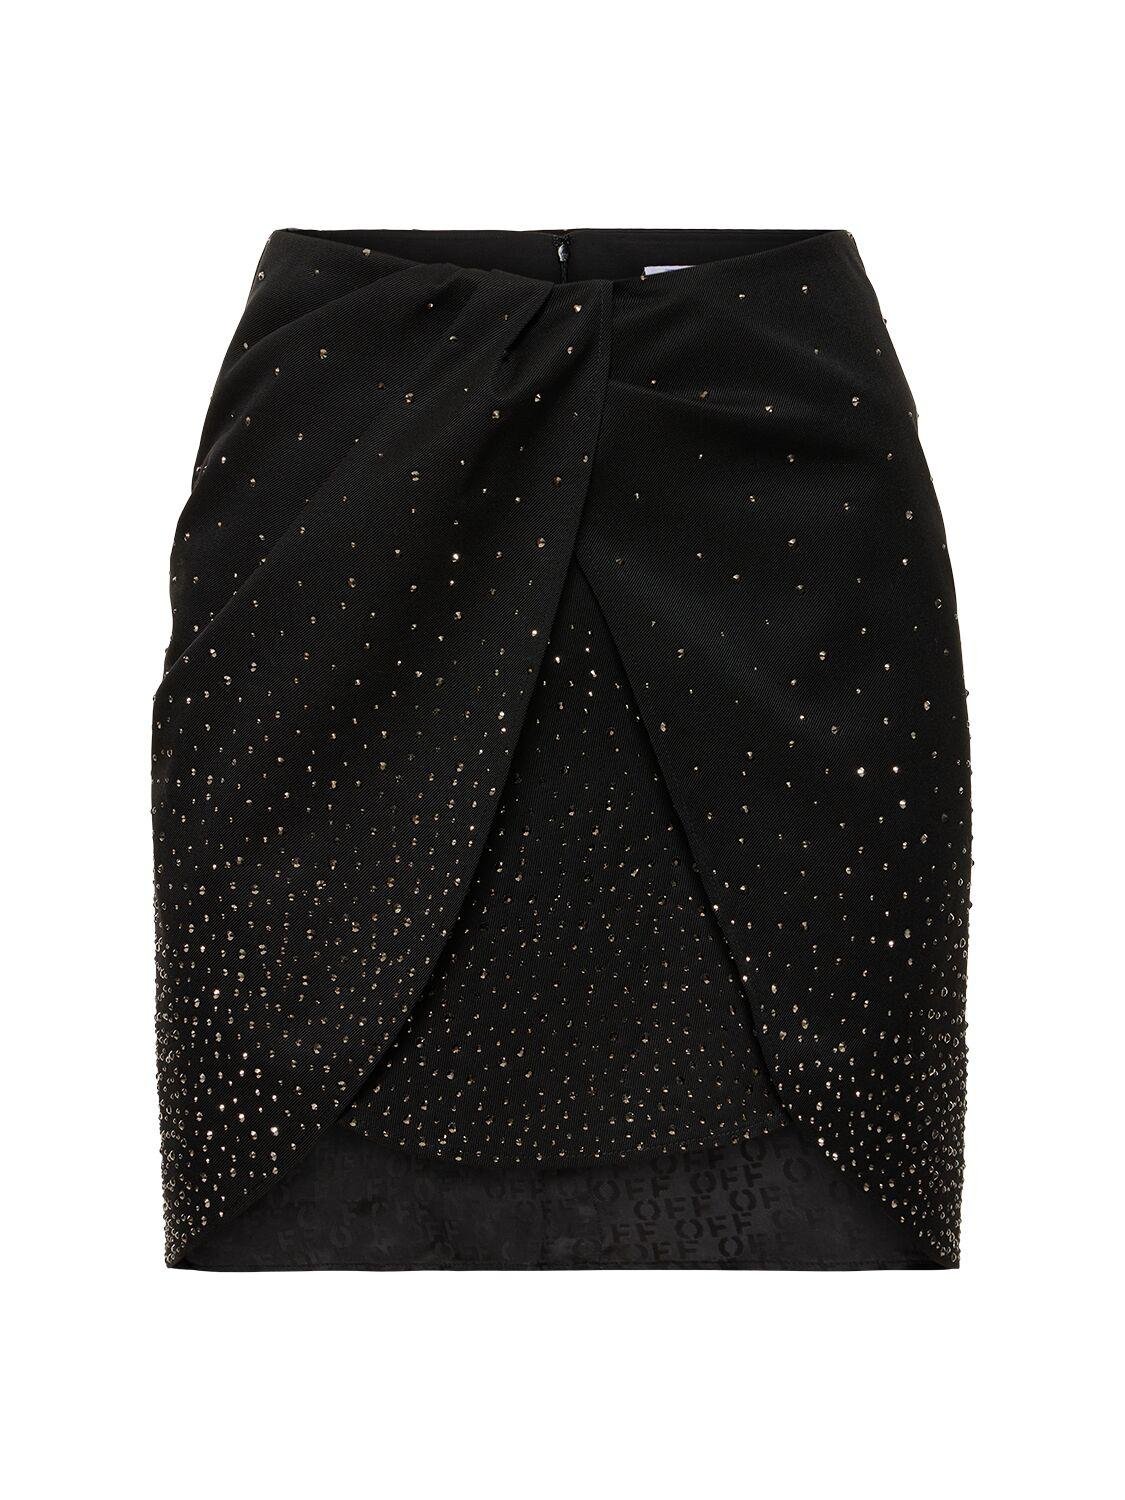 Bling Wool Twist Skirt by OFF-WHITE